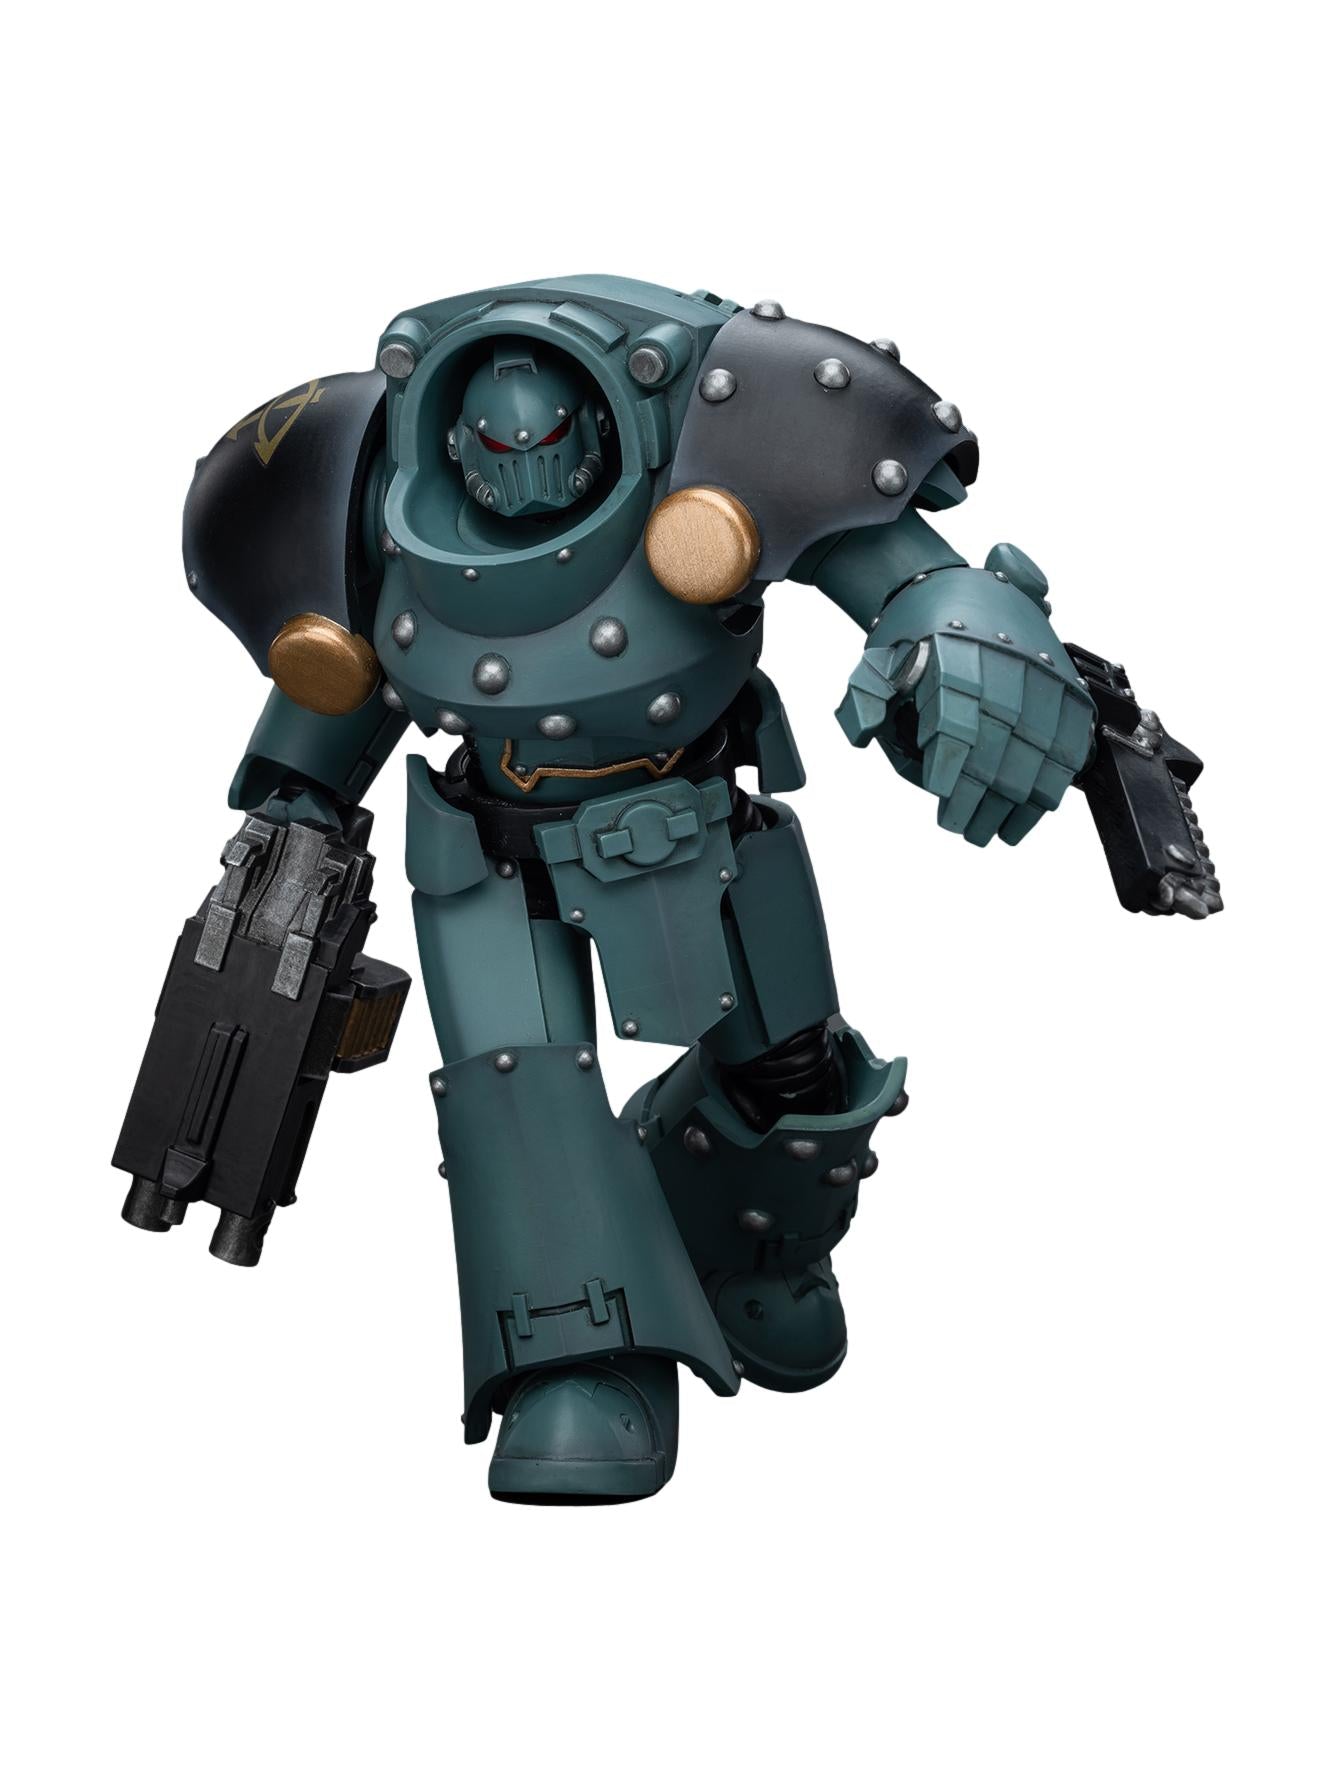 Warhammer The Horus Heresy: Sons Of Horus: Tartaros Terminator Squad Terminator With Combi-Bolter And Chainfist Joy Toy